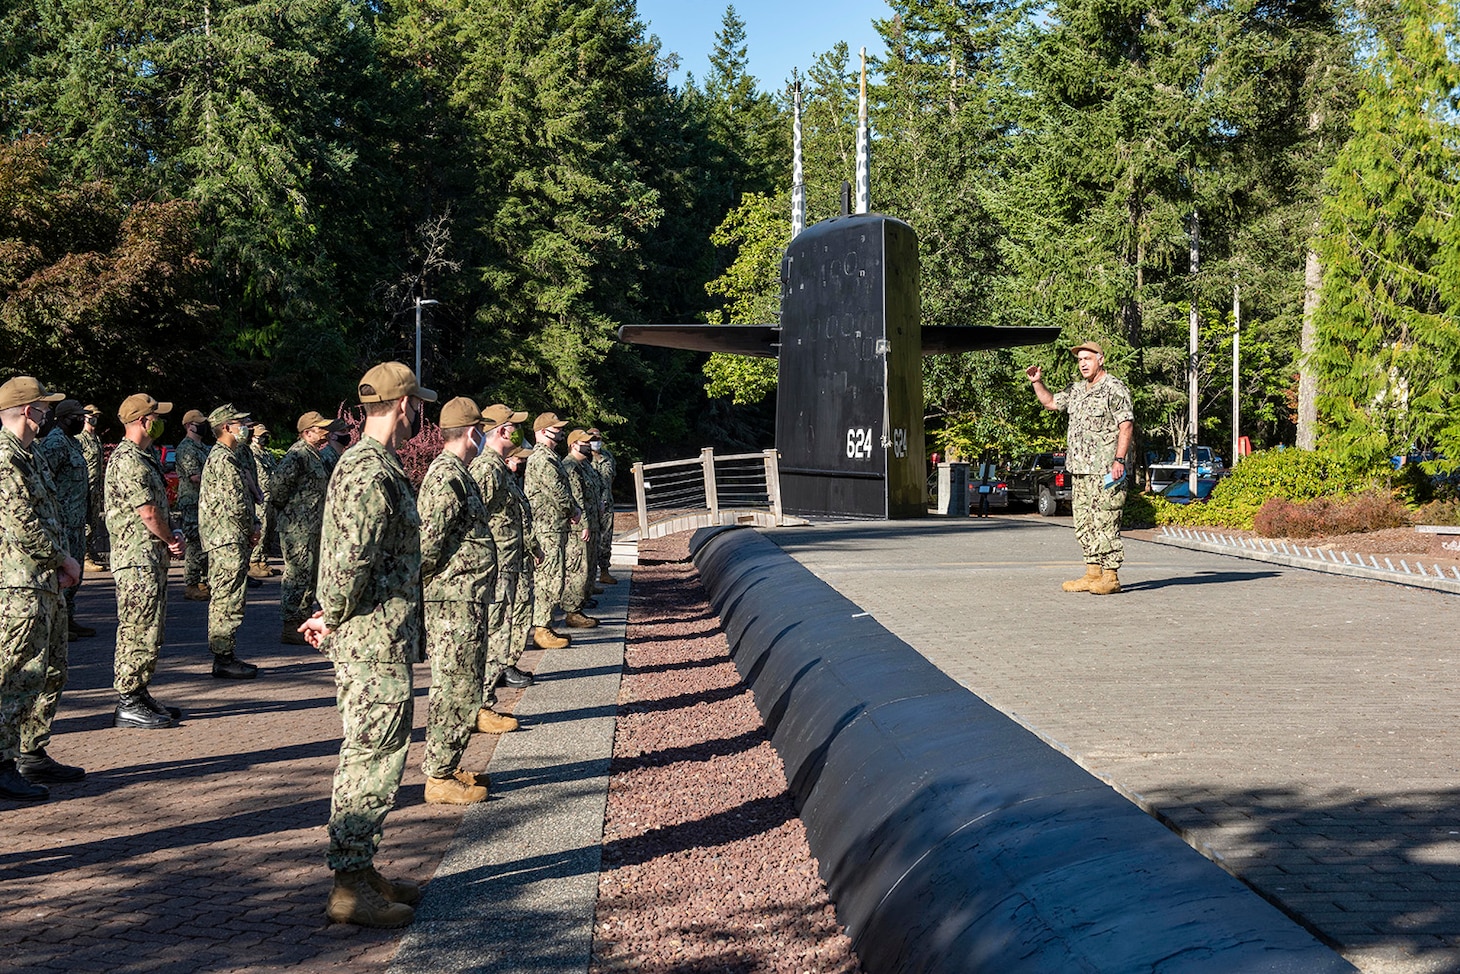 SILVERDALE, Wash. (Sept. 1, 2020) – Adm. Charles Richard, Commander, U.S. Strategic Command, speaks to a limited number of Sailors at Deterrent Park, during a visit with strategic-deterrent units onboard Naval Base Kitsap-Bangor, Sept. 1. U.S. Strategic Command is a global warfighting combatant command whose mission is to deter strategic attack and employ forces, as directed, to guarantee the security of the U.S. and its allies. (U.S. Navy photo my Mass Communication Specialist 1st Class Andrea Perez/Released)